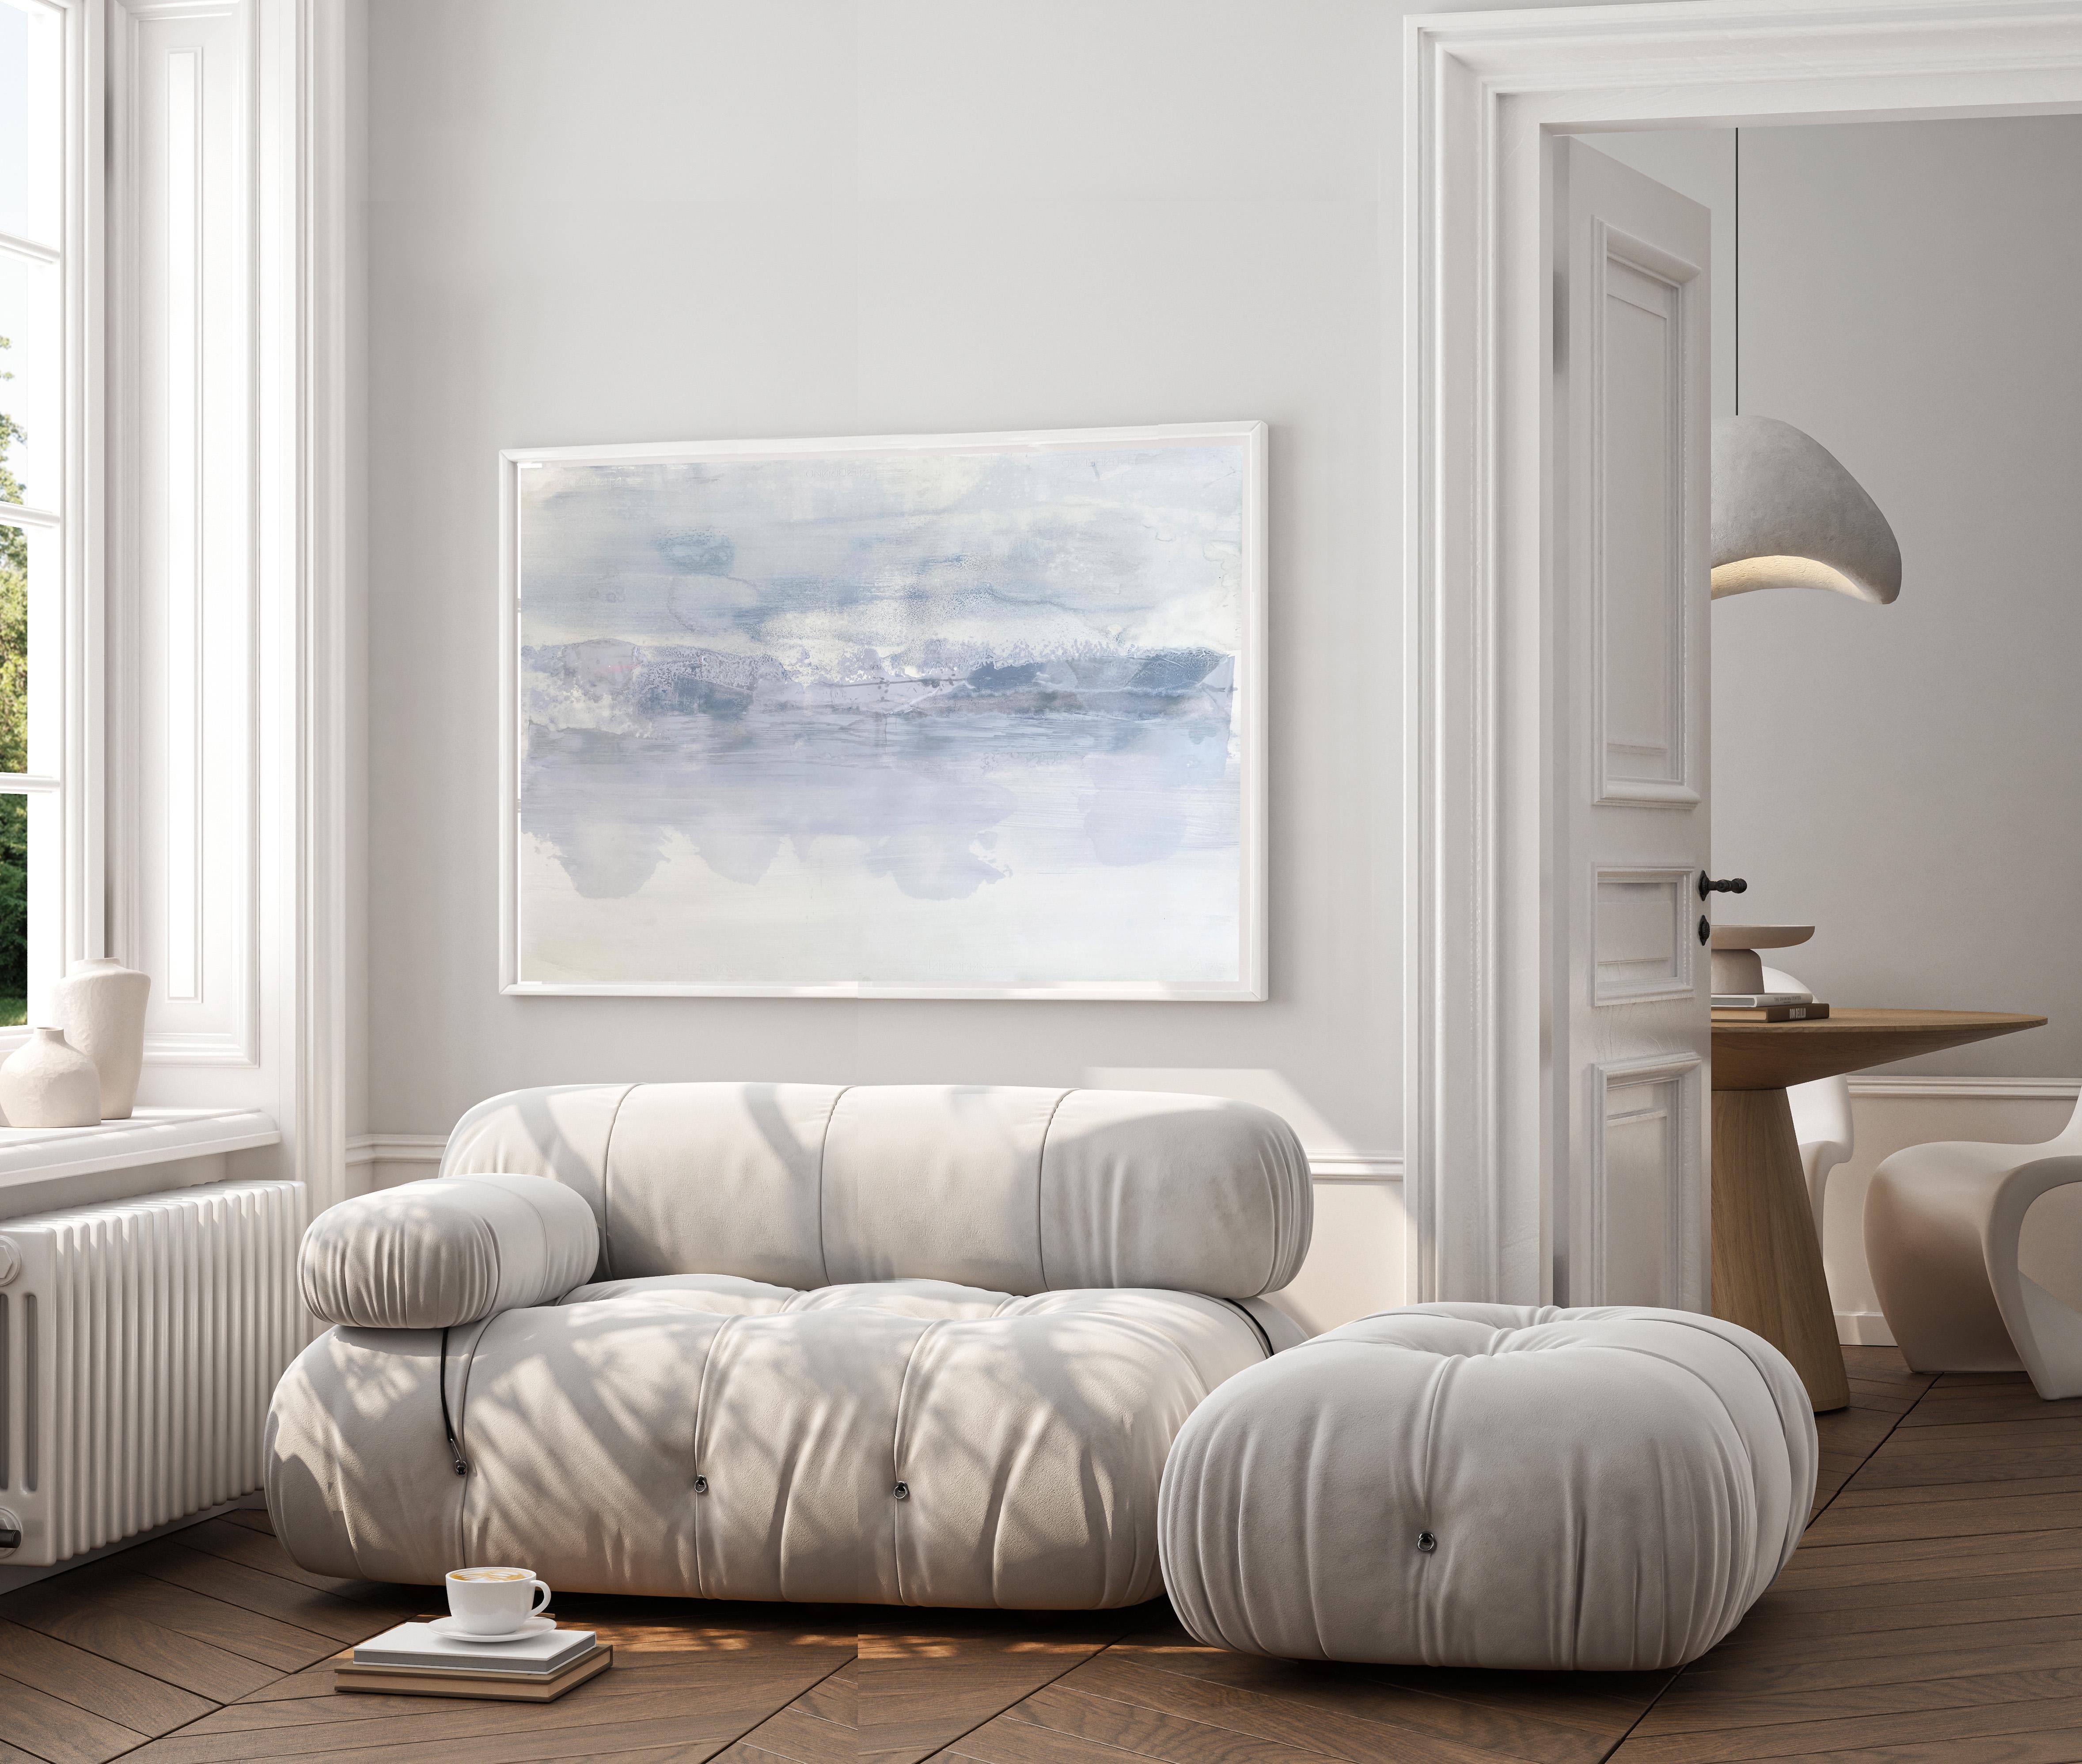 Snowy Grey no1 Nordic Scandi abstract landscape minimal white fine art painting - Painting by Kathleen Rhee